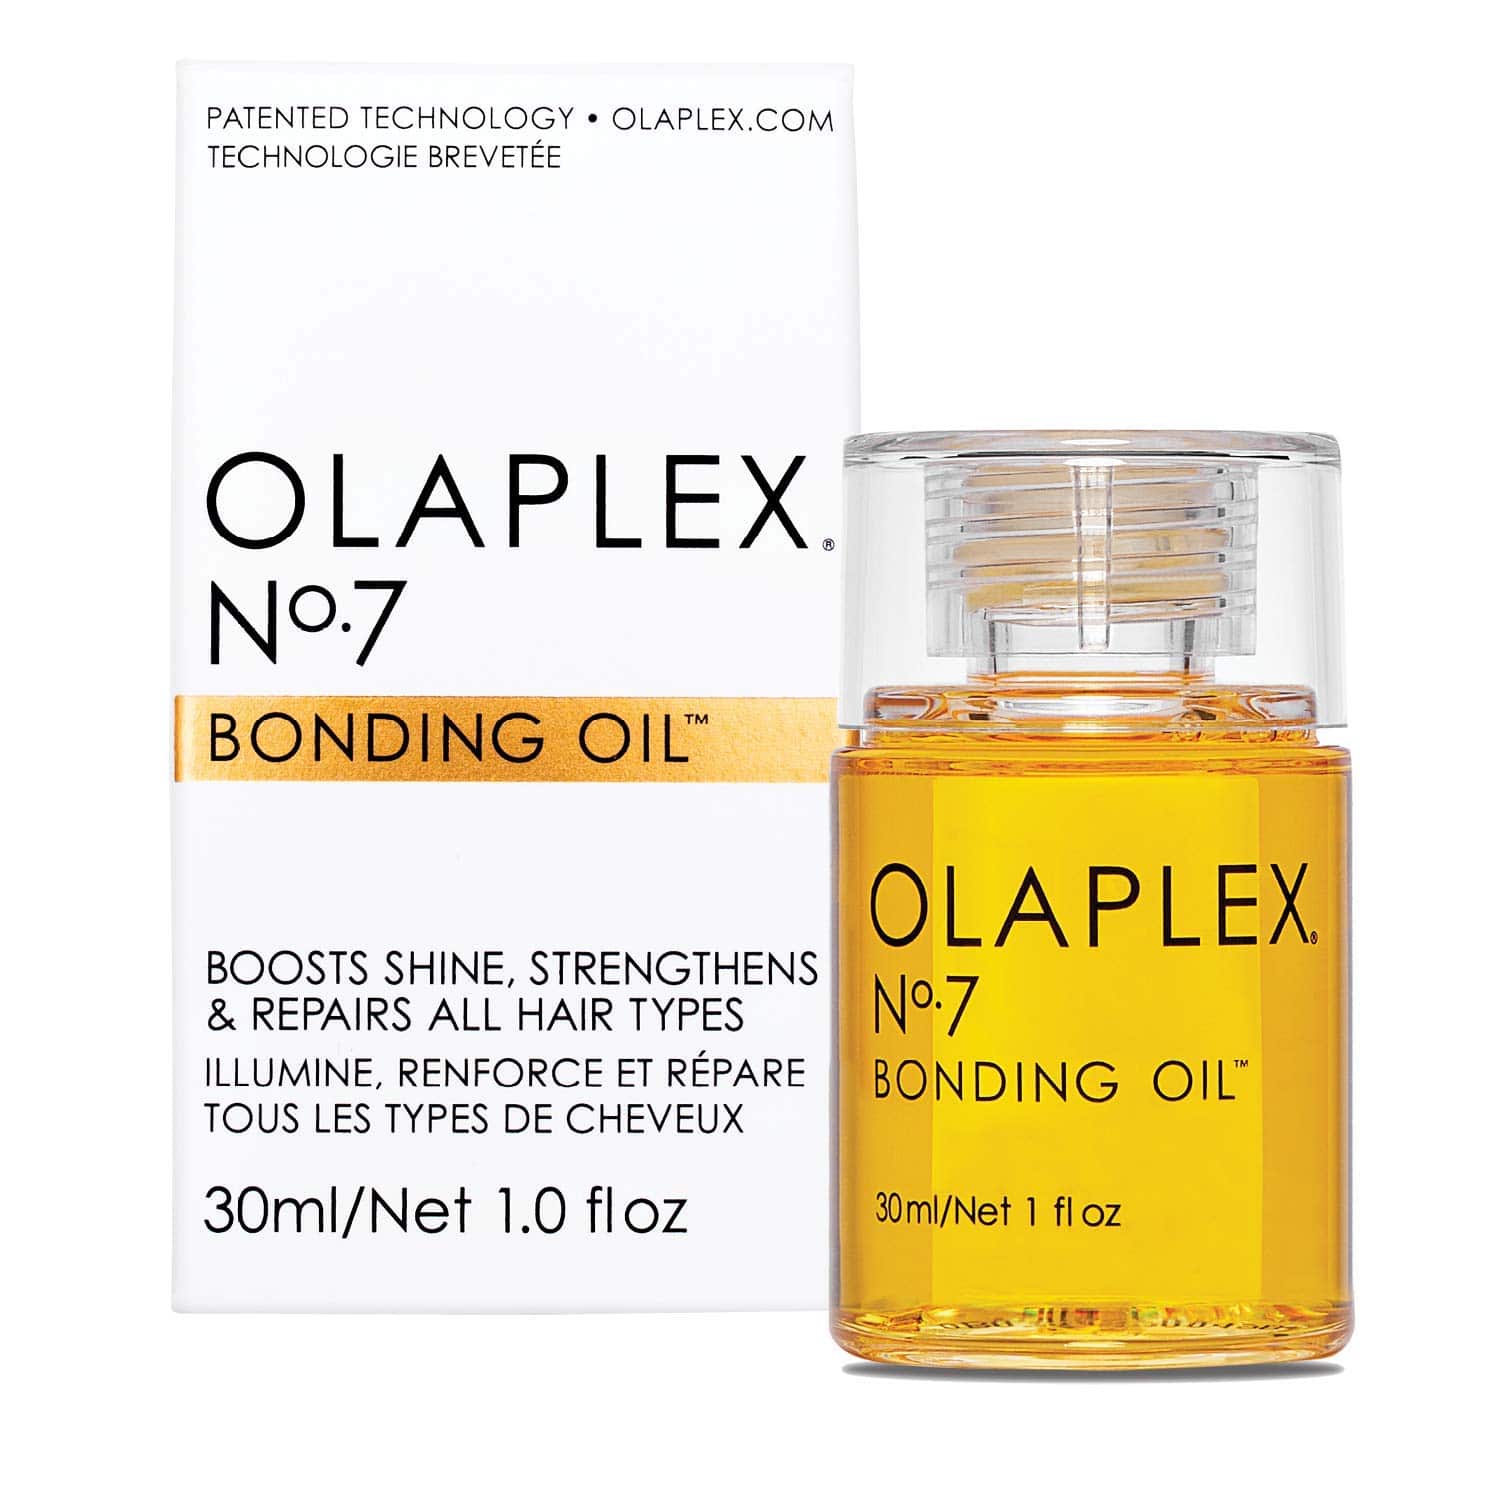 Olaplex No 7 Bonding Oil to boost shine, strengthen hair, and protect hair